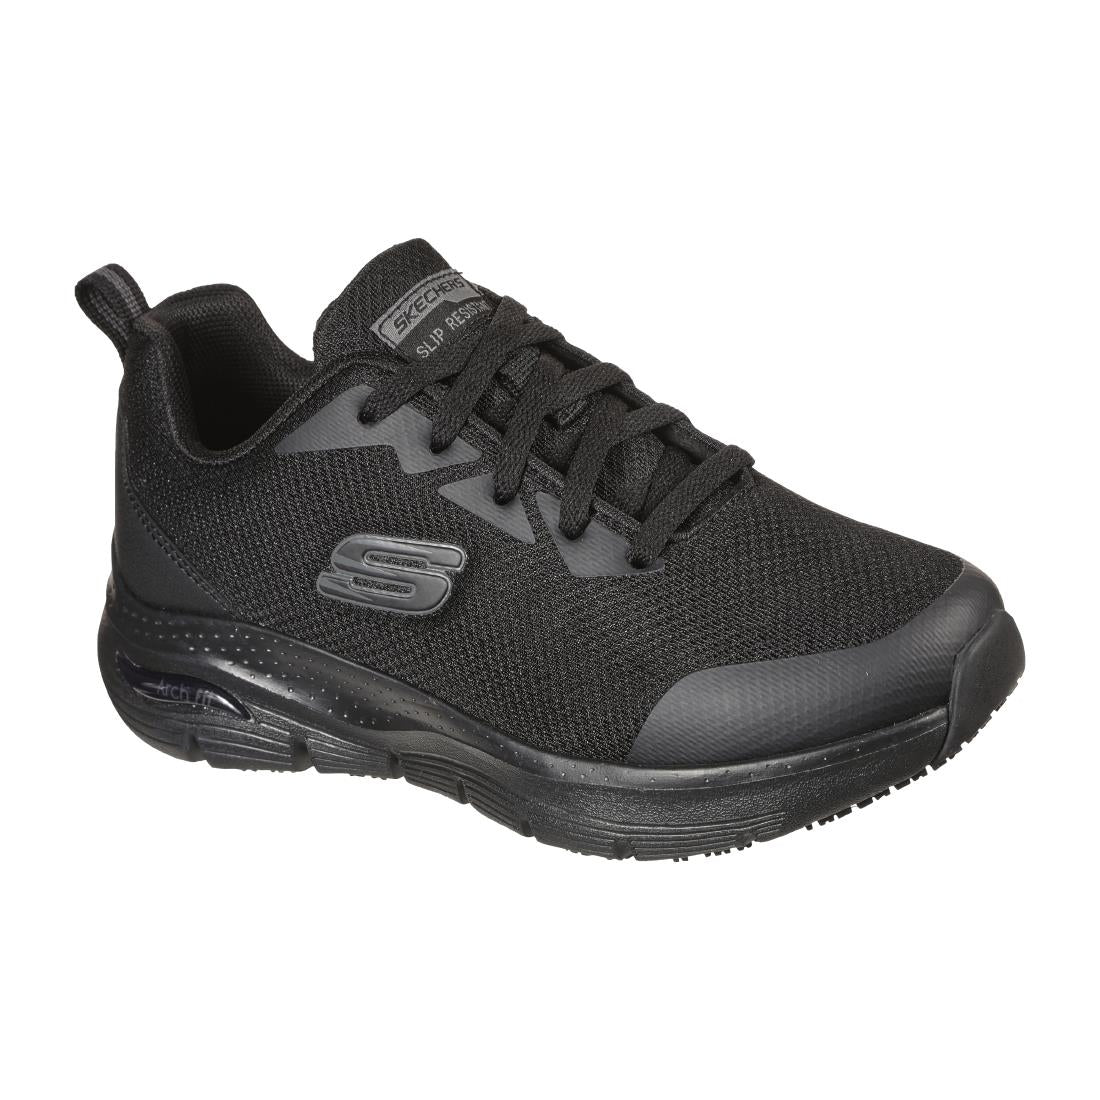 BB671-36 Skechers Womens Slip Resistant Arch Fit Trainer Size 36 JD Catering Equipment Solutions Ltd